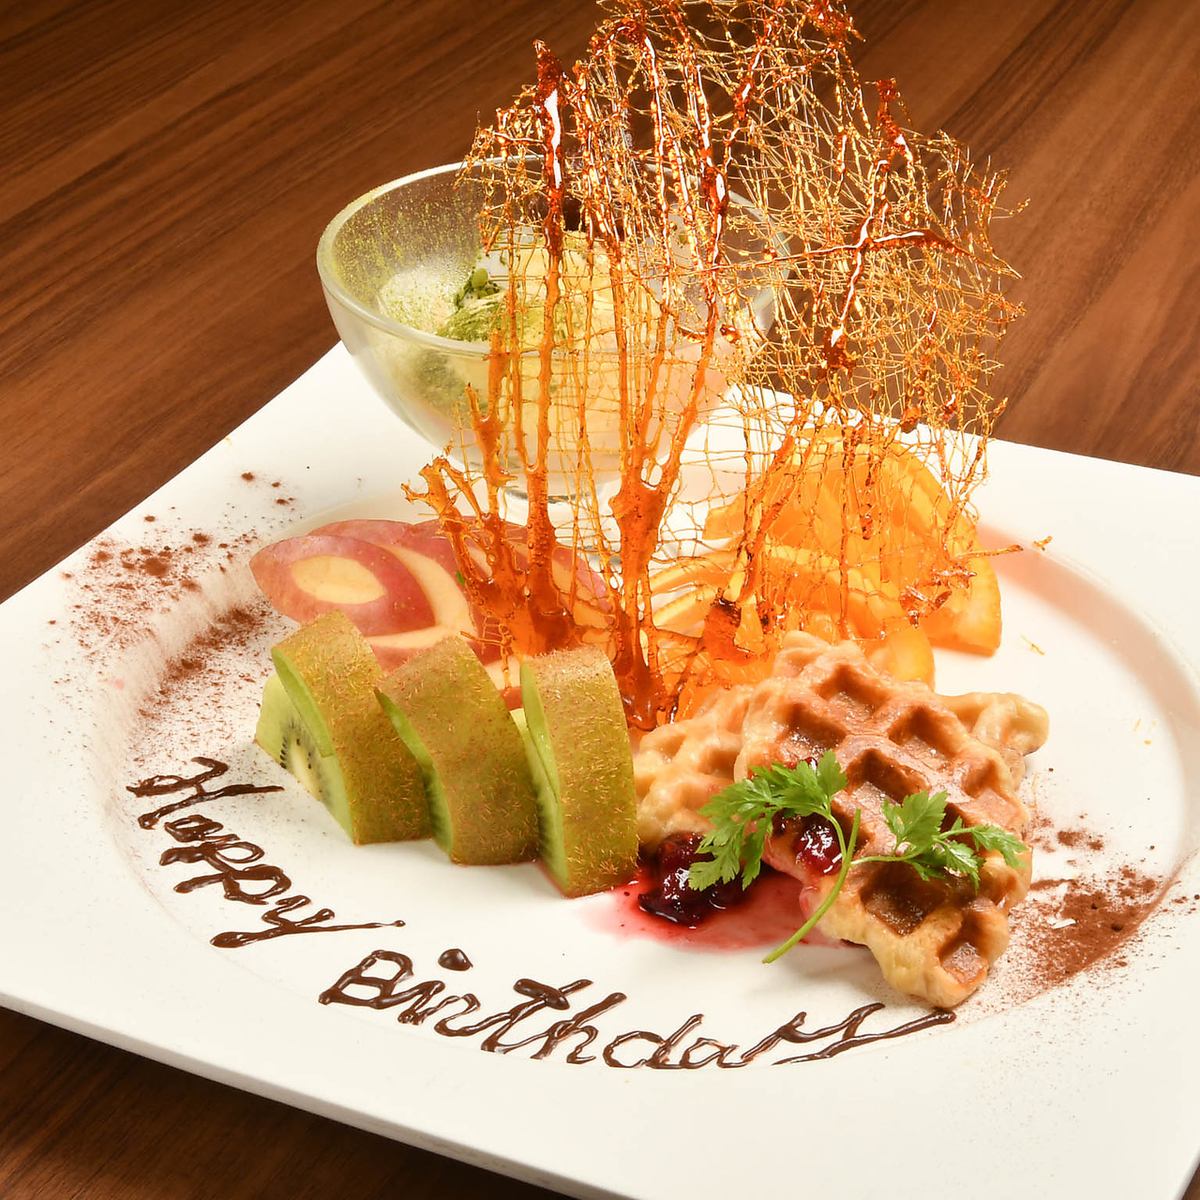 There is also a special birthday plate made by a professional pastry chef ◎